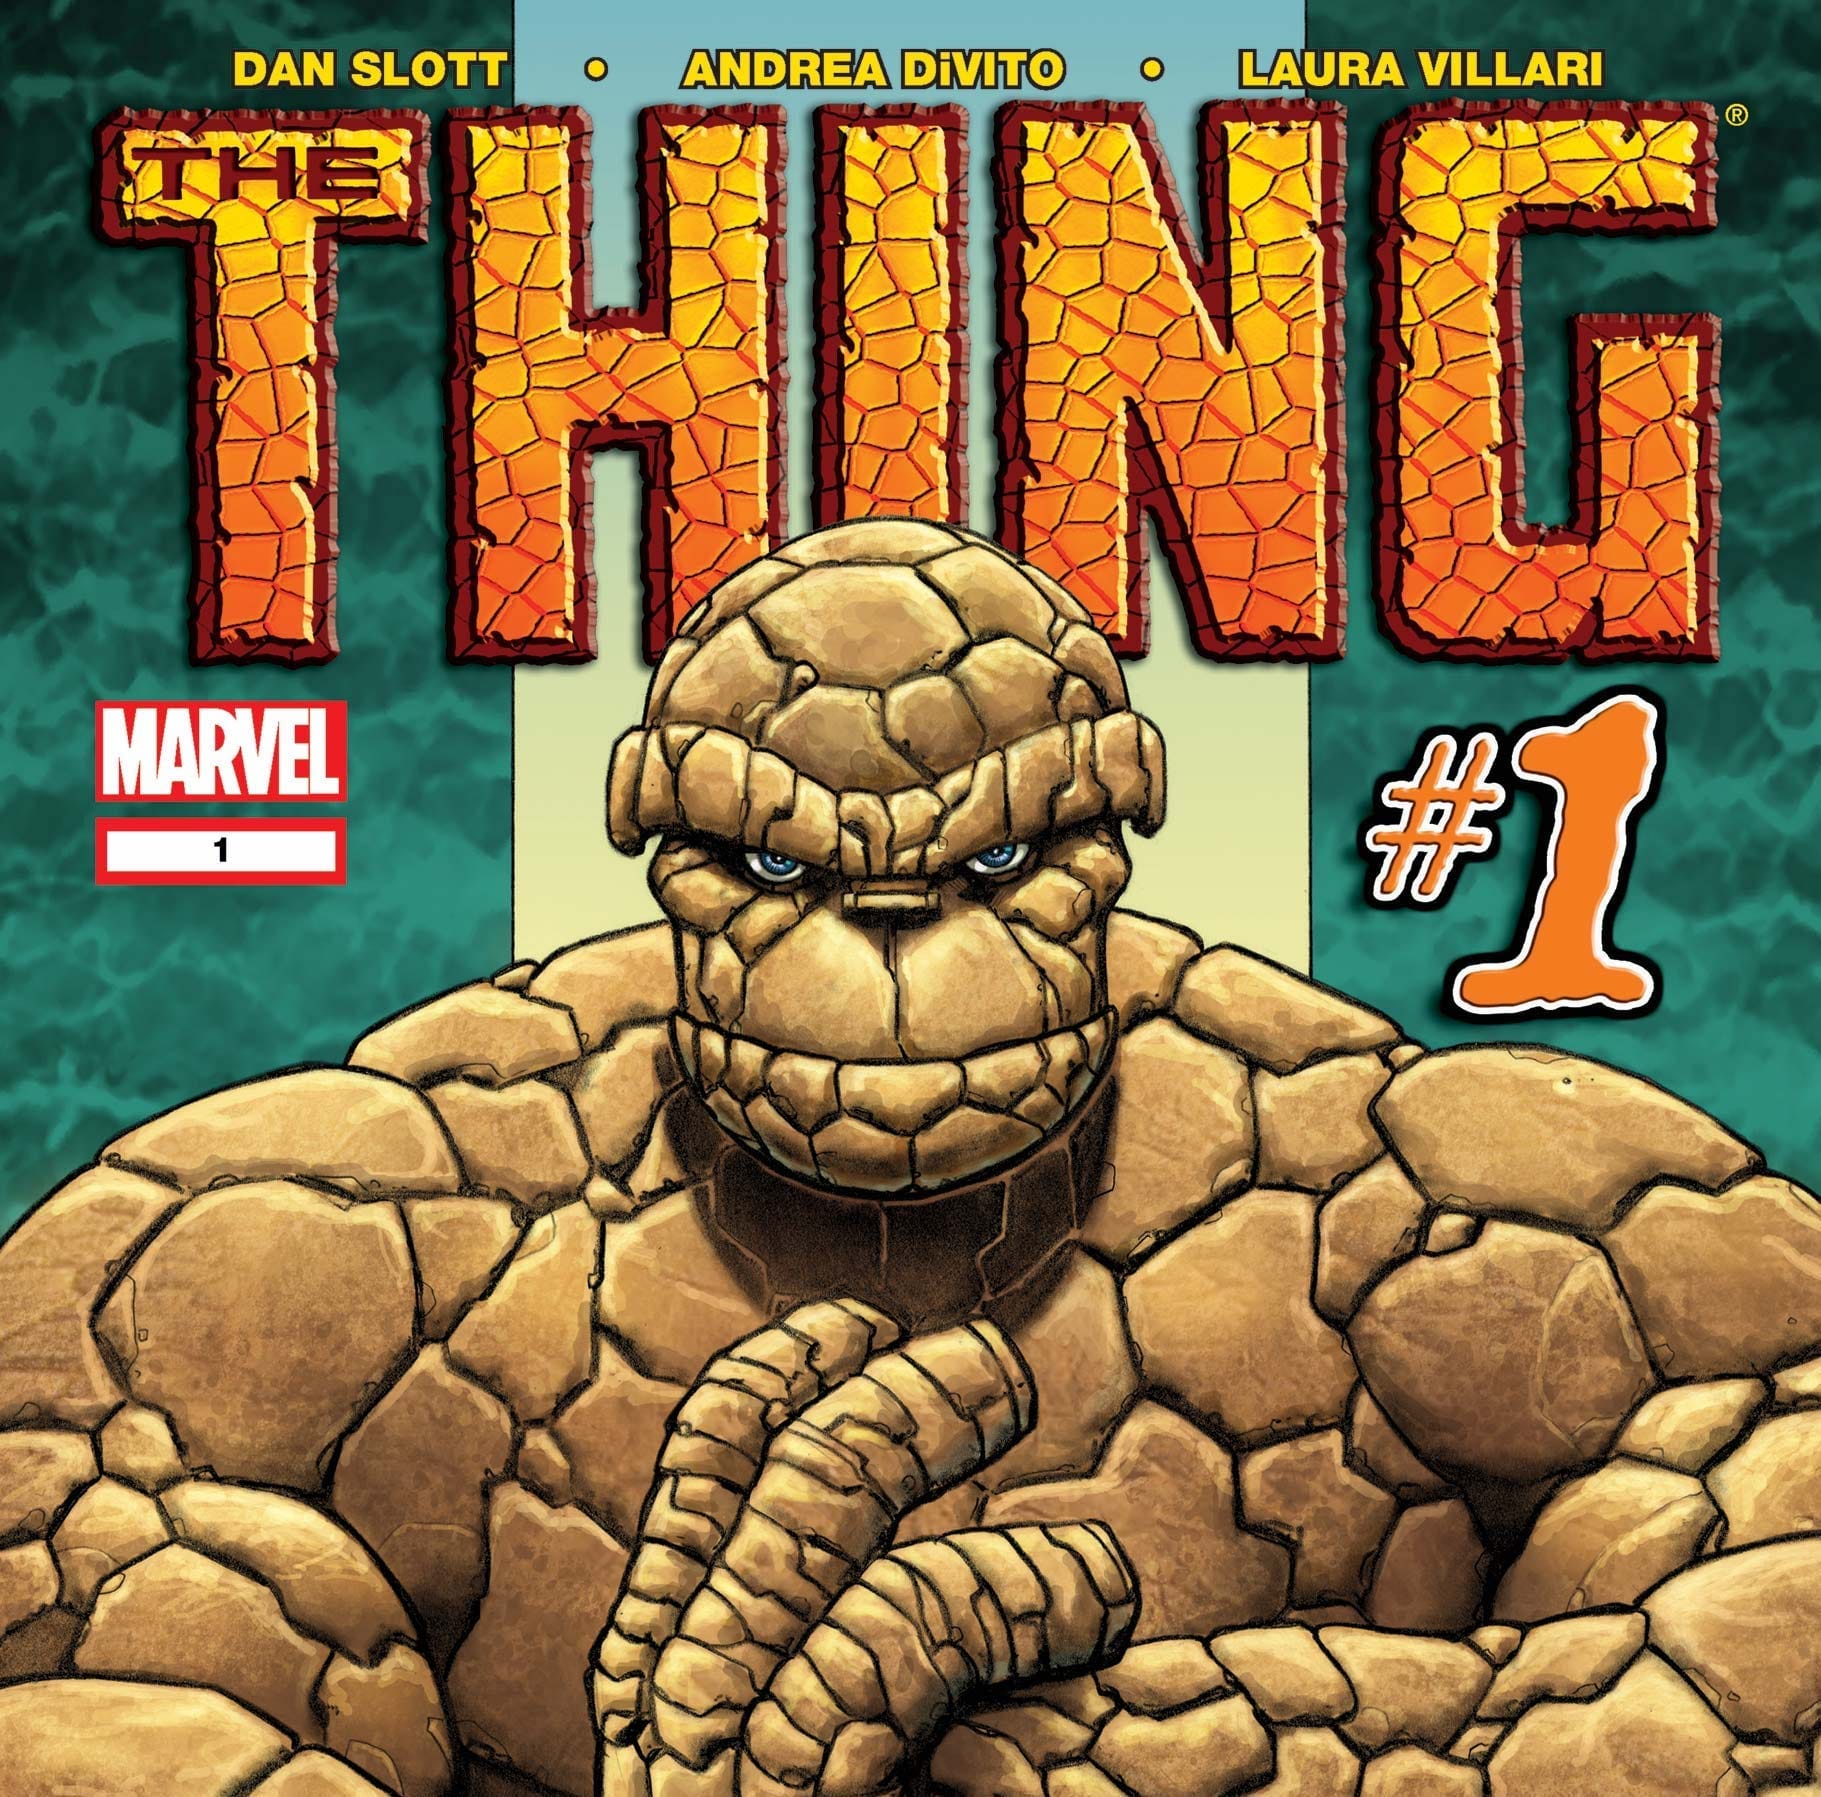 Portion of the cover for Marvel's The Thing Issue #1, which features  The Thing -- a muscular humanoid figure appearing to be made from cracked brown rock, pressing a fist into his open hand